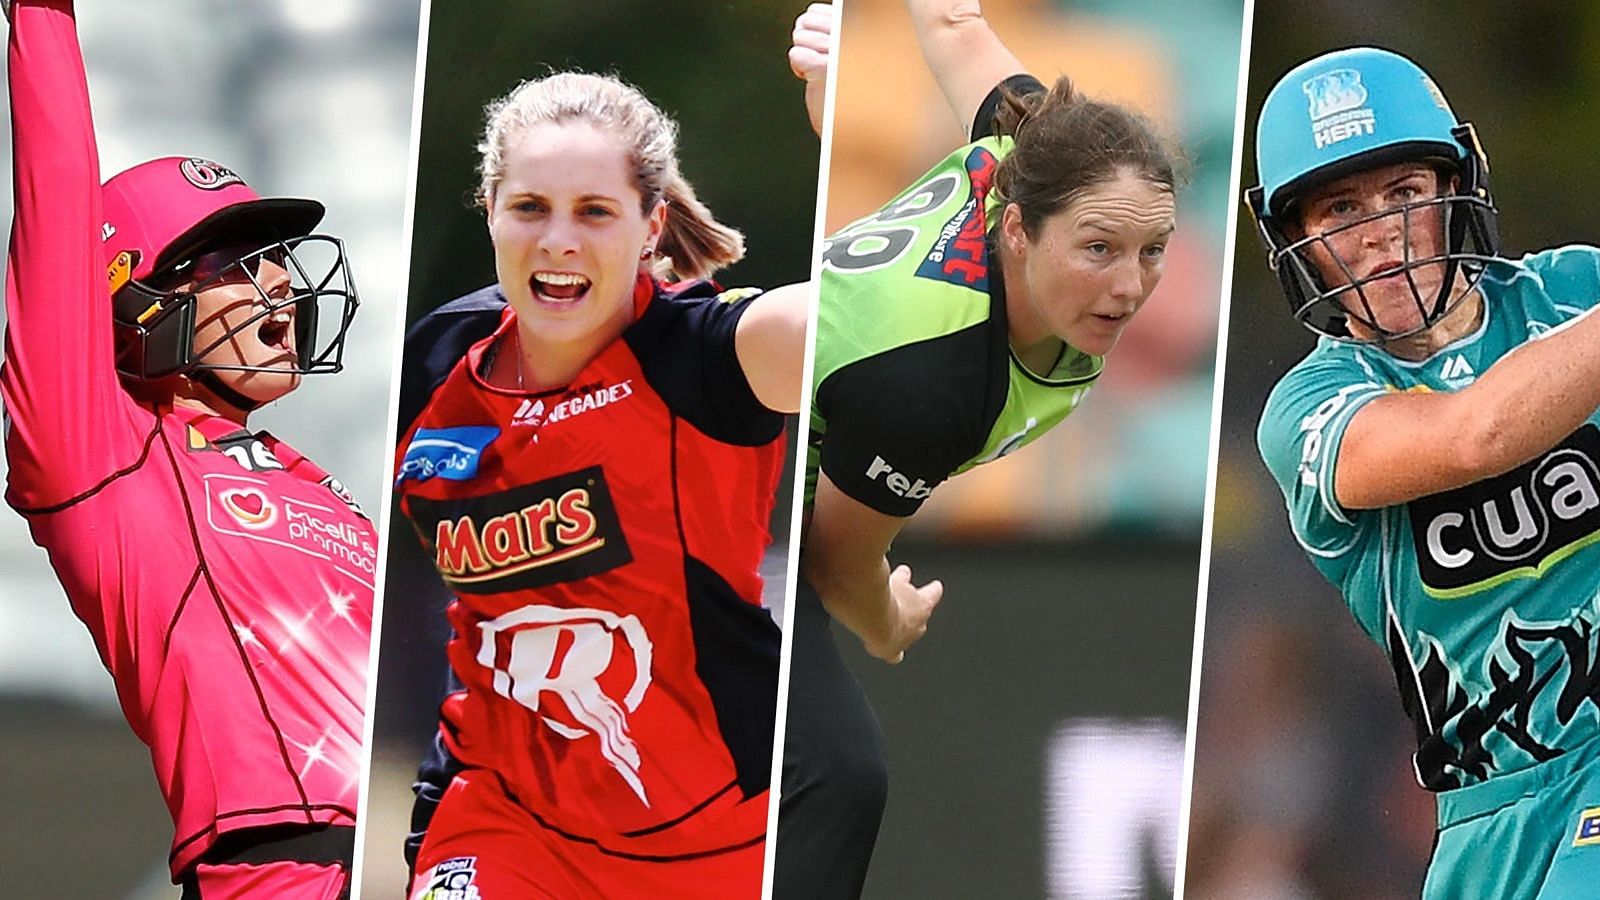 Due to the ongoing COVID-19 pandemic, the entire 2020-21 Women’s Big Bash League will be played in Sydney.